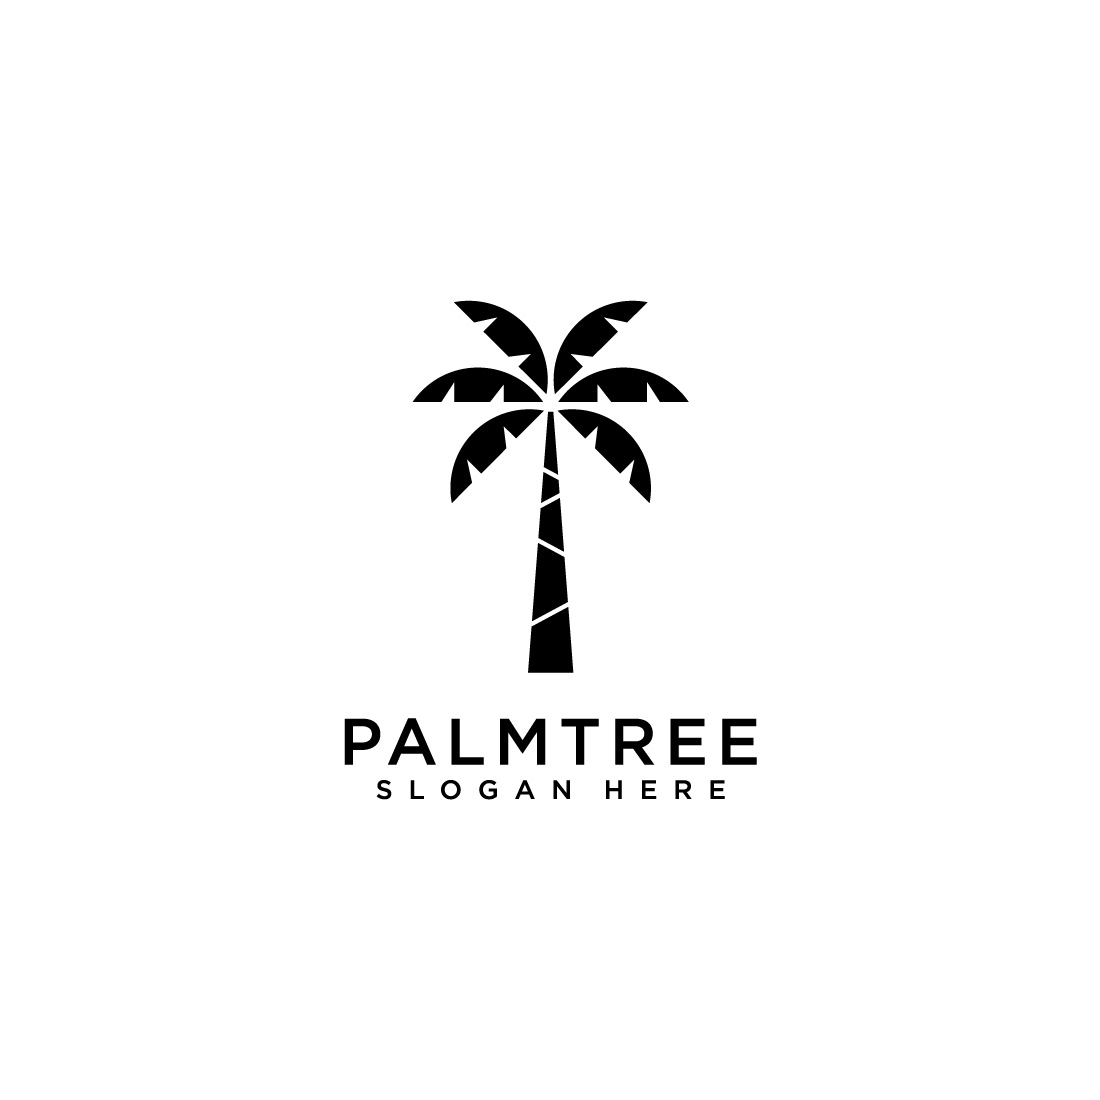 palm tree logo vector design template cover image.